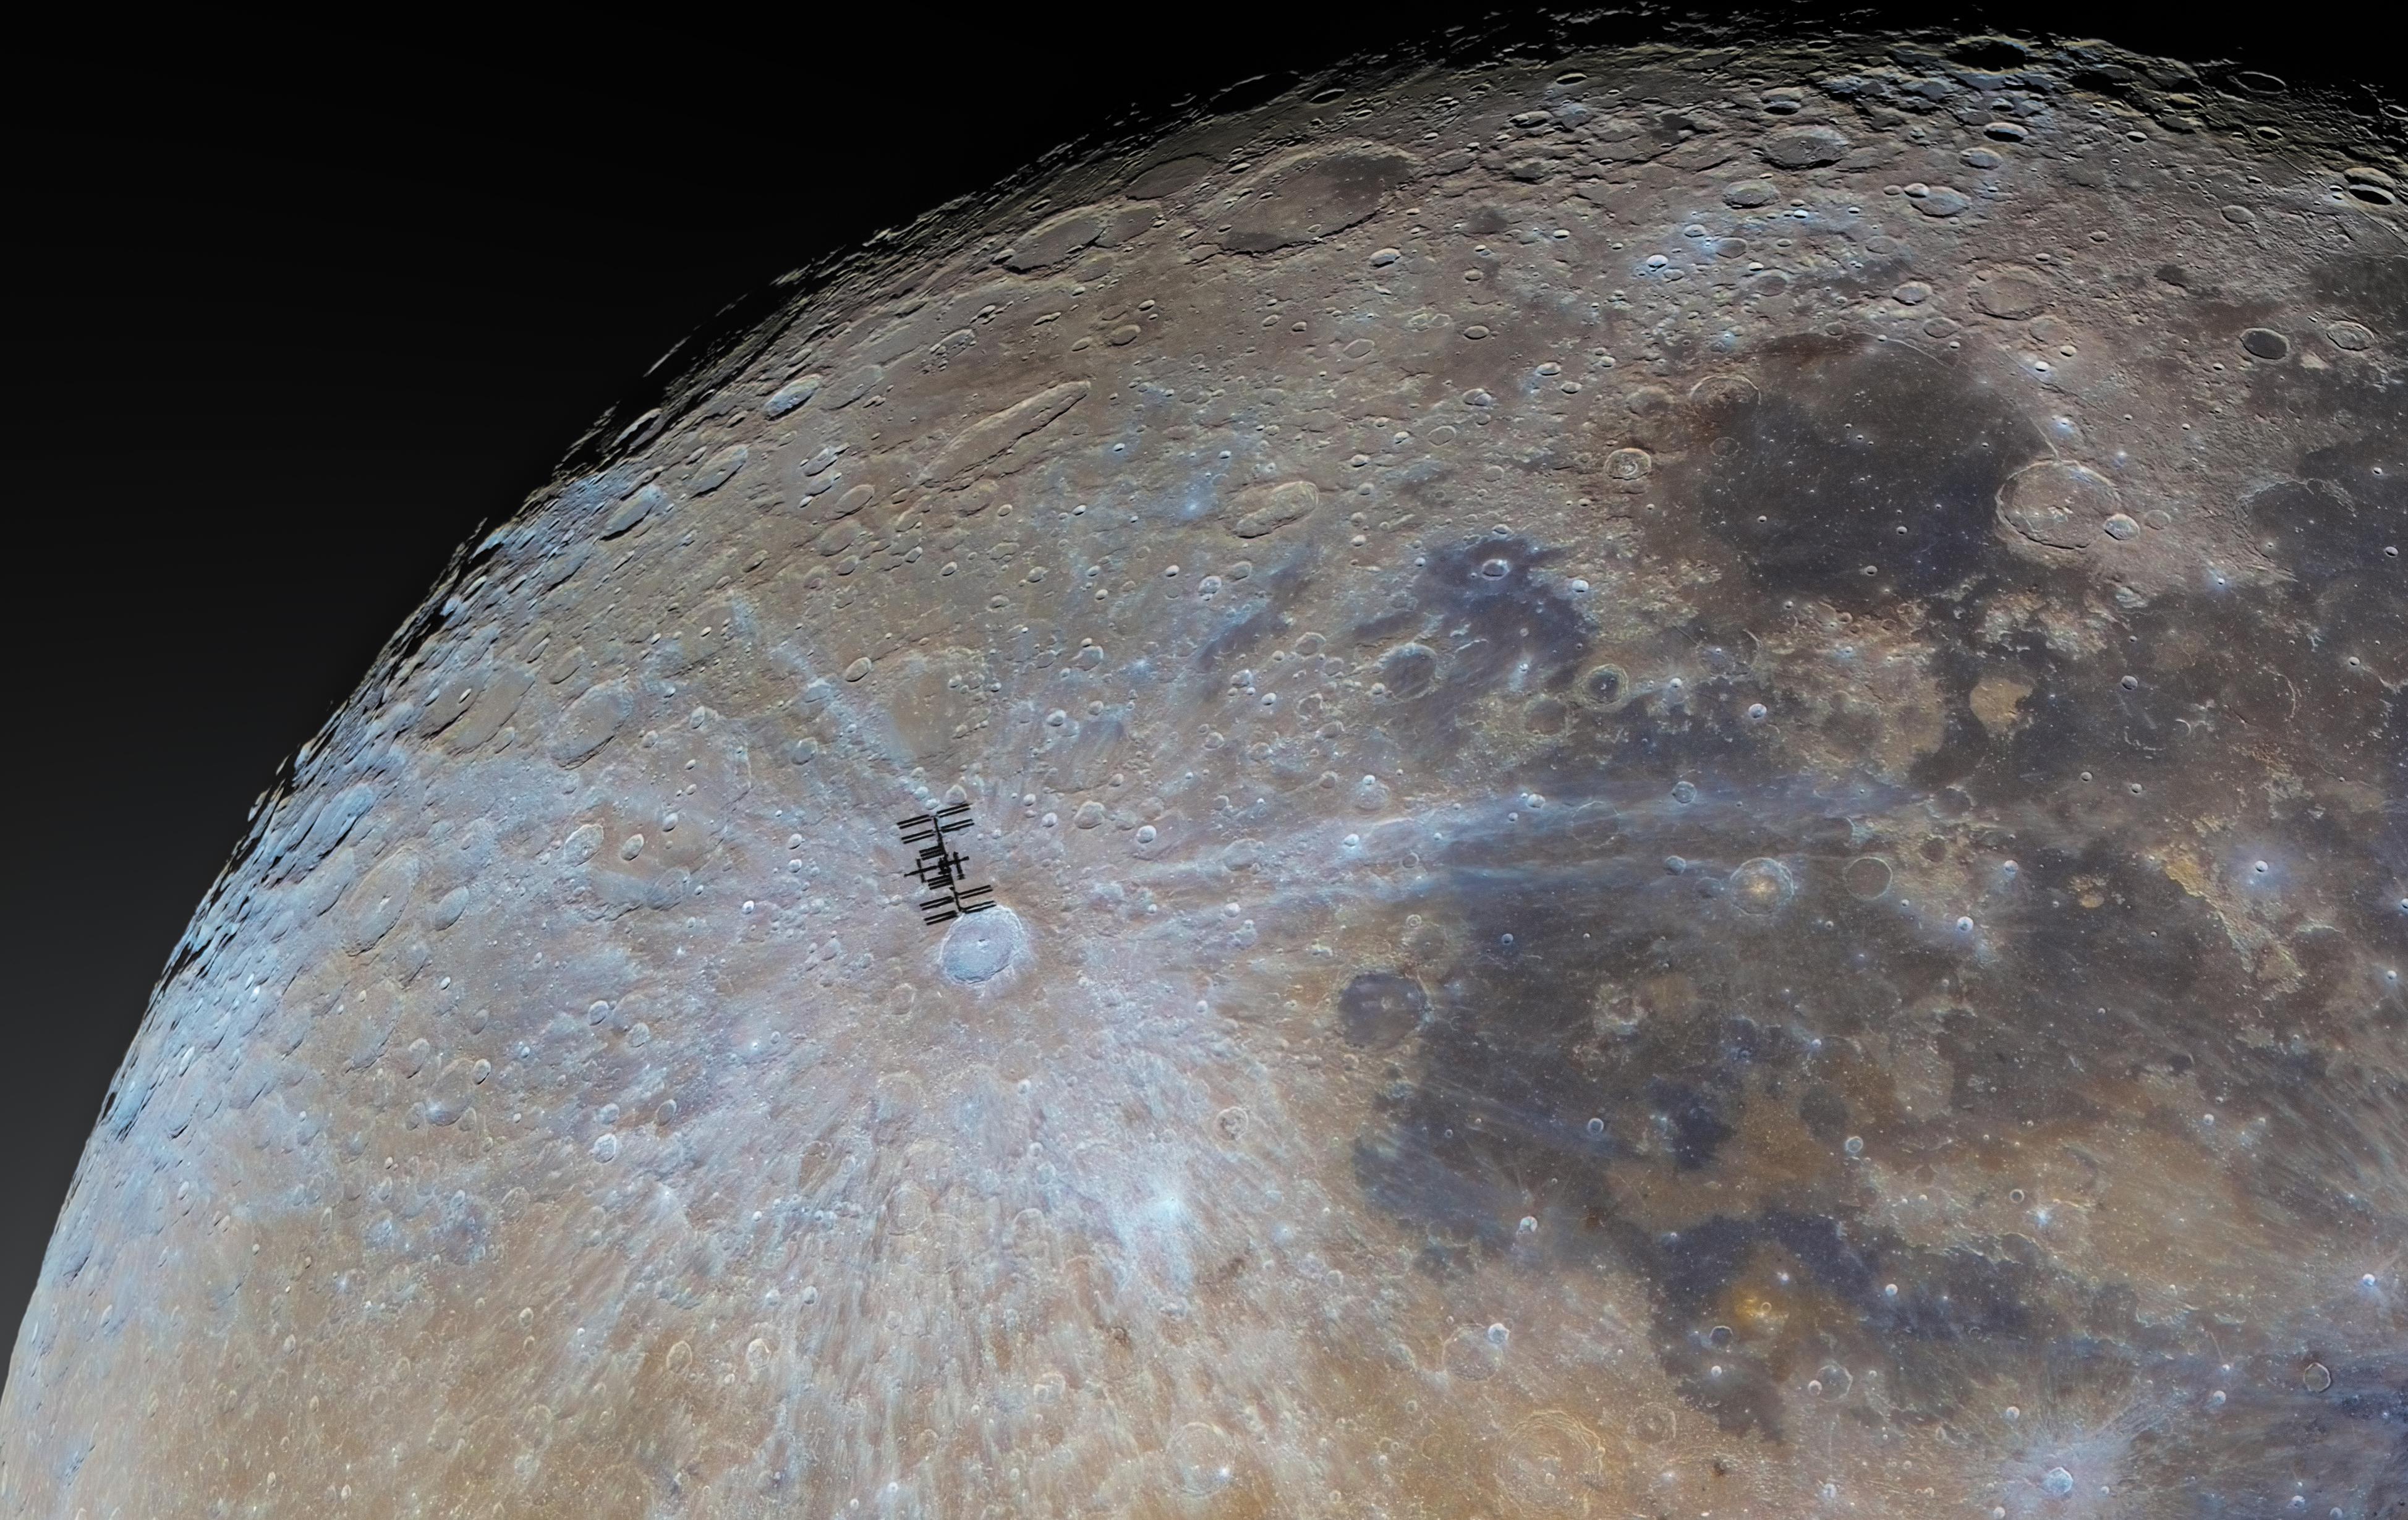 I captured the International Space Station in conjunction with the 53-mile-wide Tycho crater on the moon.jpg